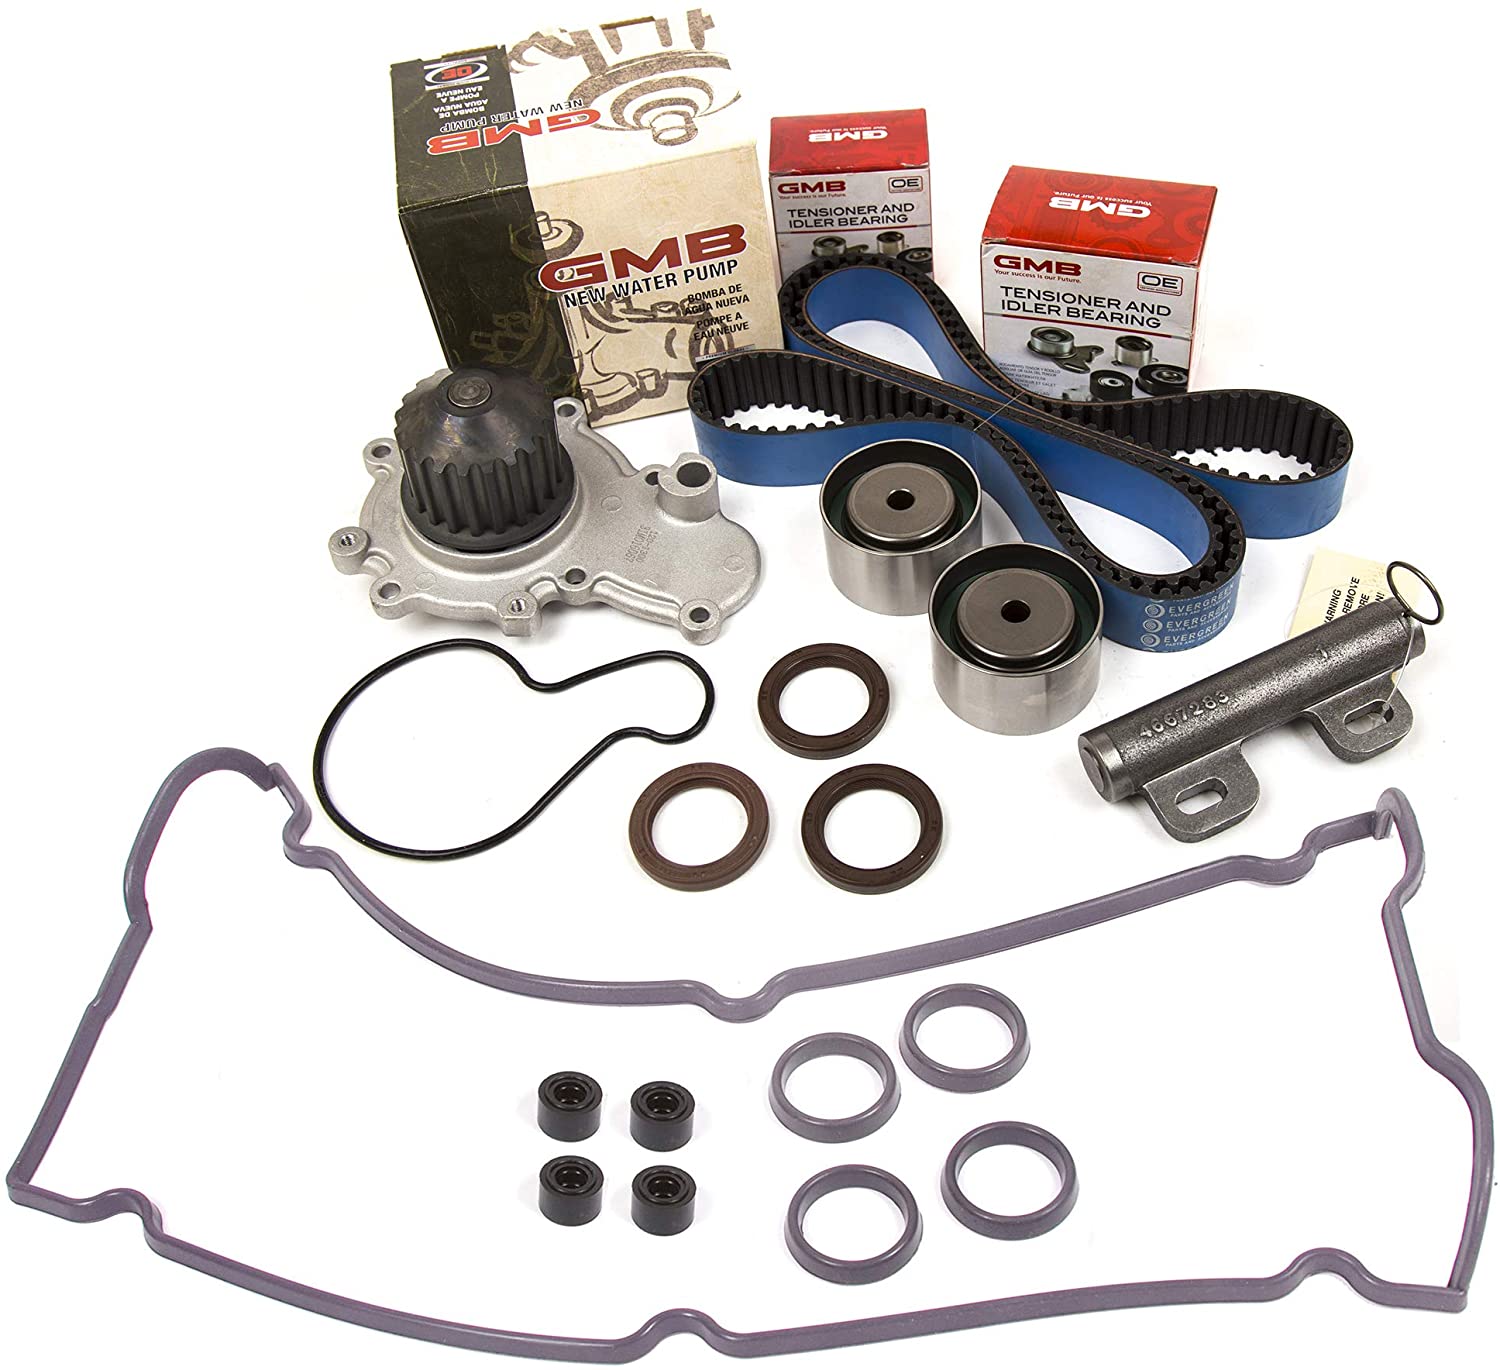 Evergreen TBK246HPHVC Race Series Timing Belt Kit Water Pump Valve Cover Fit 95-99 Eagle Mitsubishi Dodge 2.0 420A